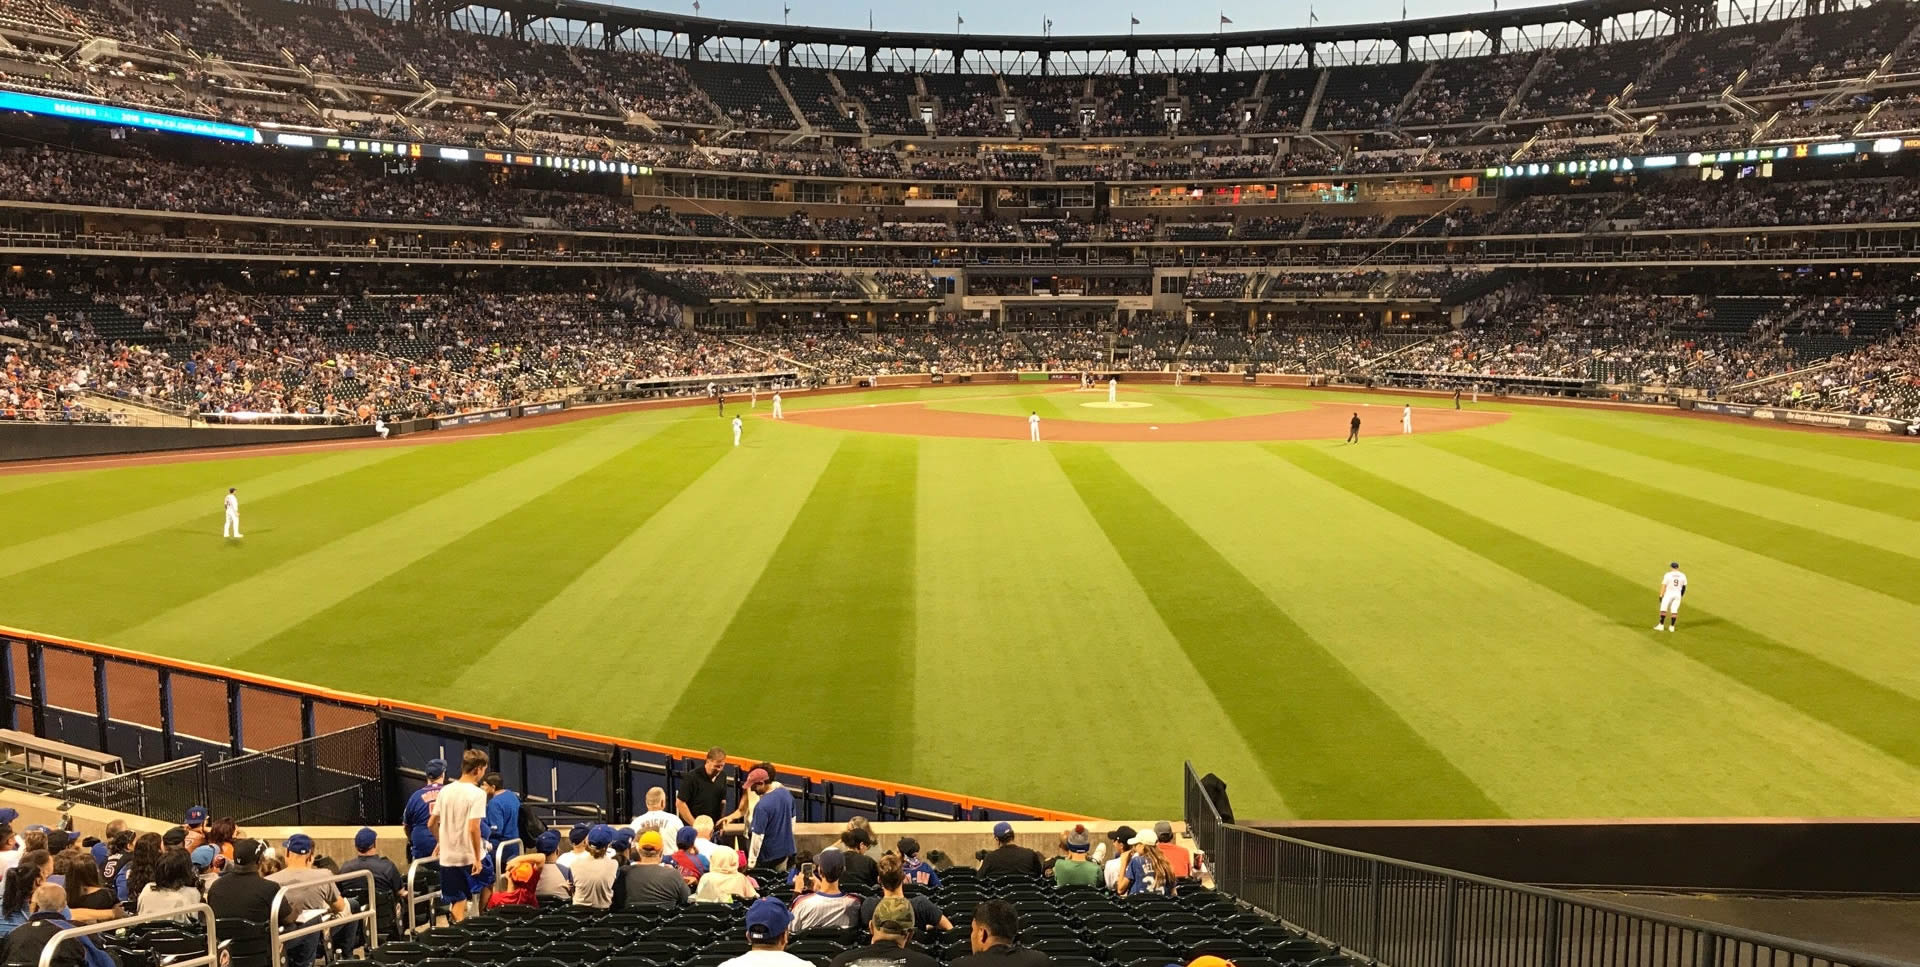 section 140, row 19 seat view  - citi field